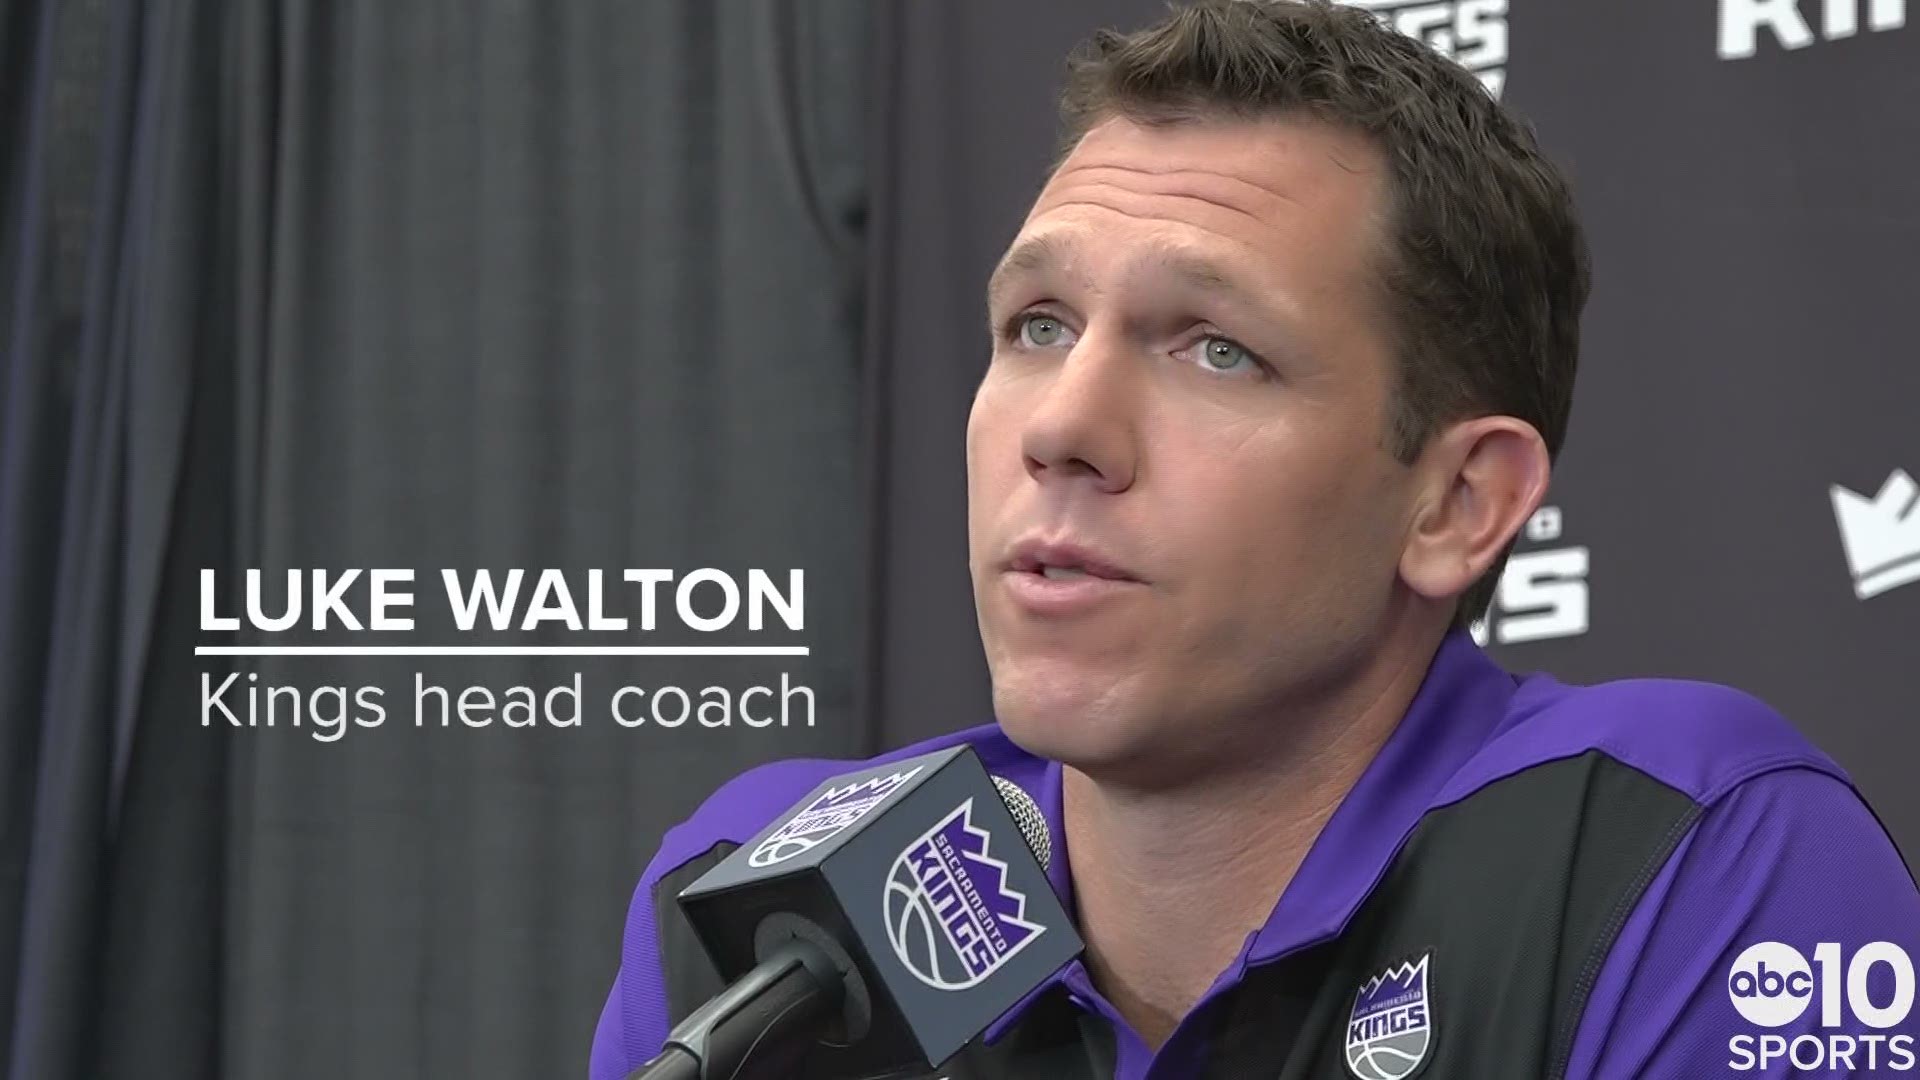 Luke Walton joins the Sacramento Kings after three seasons as head coach of the Los Angeles Lakers and after two years as an assistant coach with the Golden State Warriors